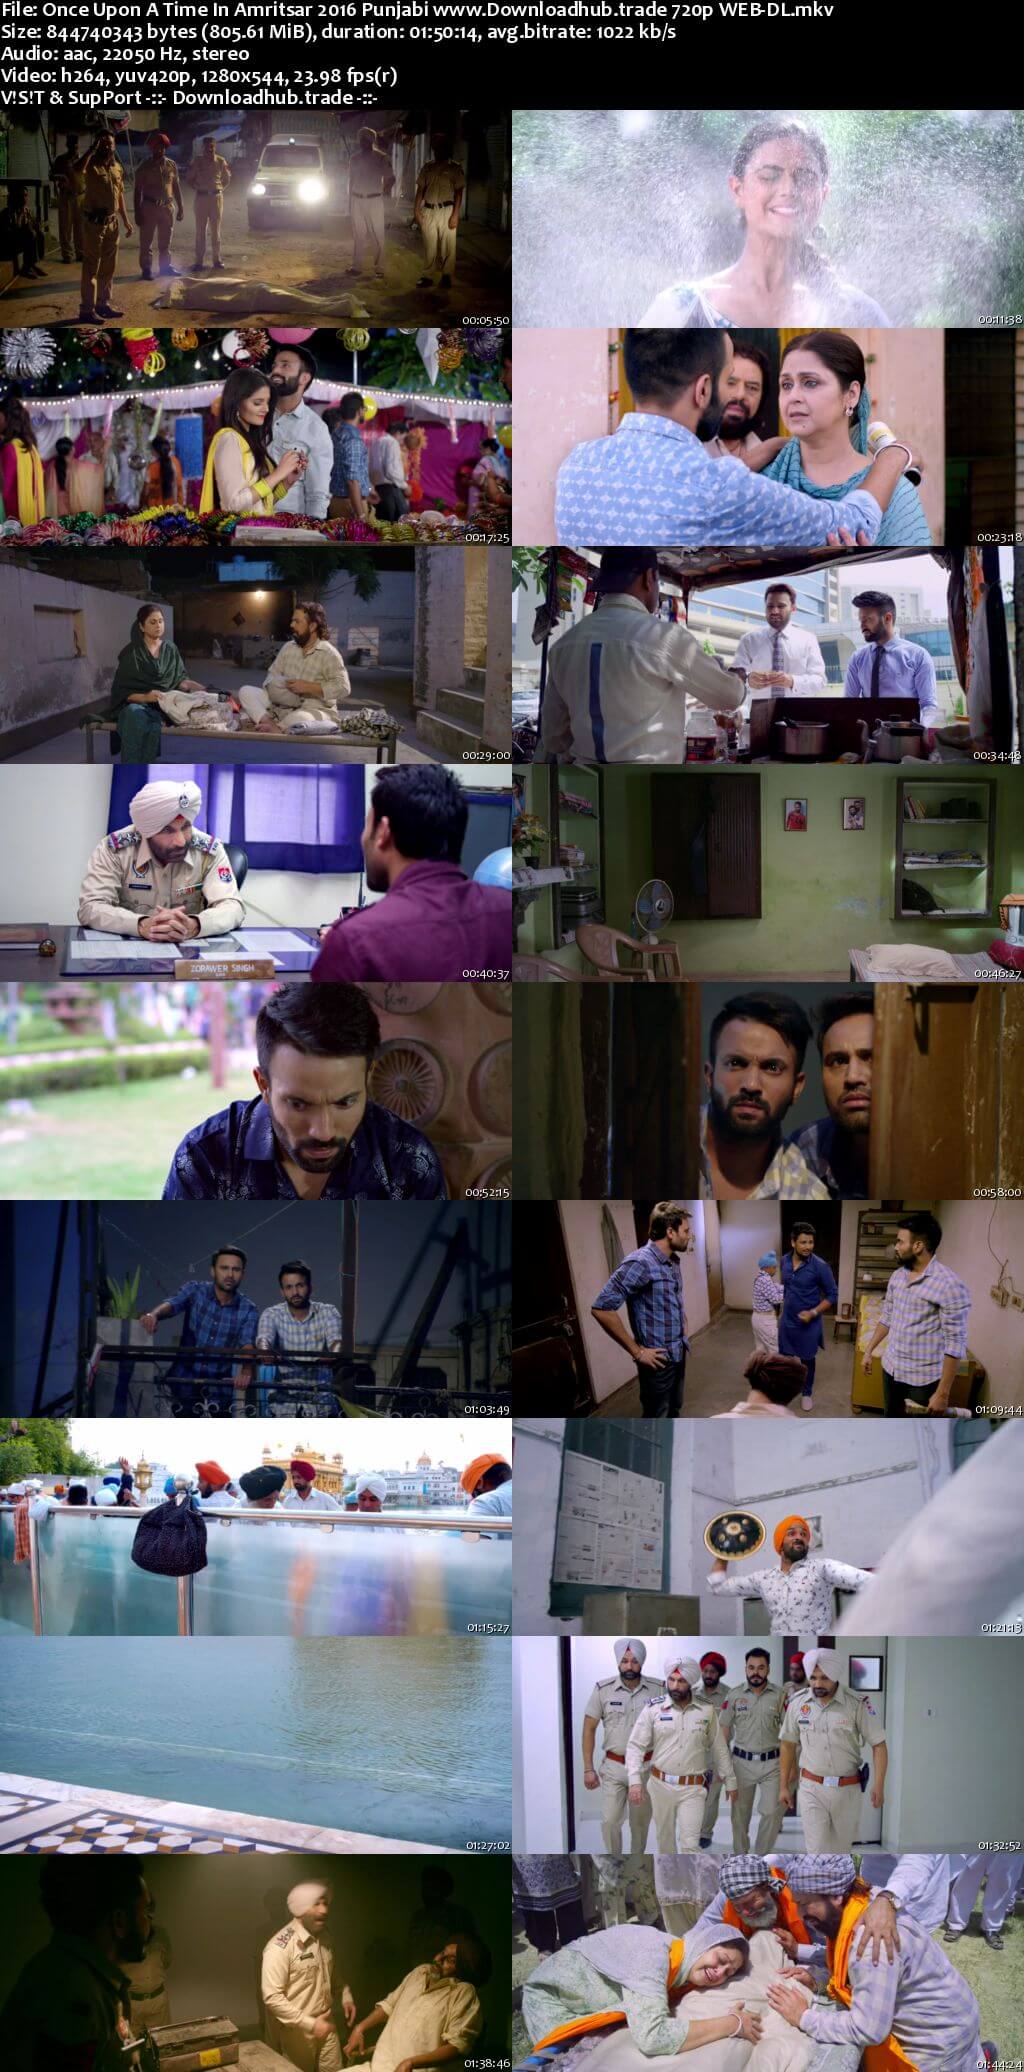 Once Upon a Time in Amritsar 2016 Punjabi 720p HDRip x264